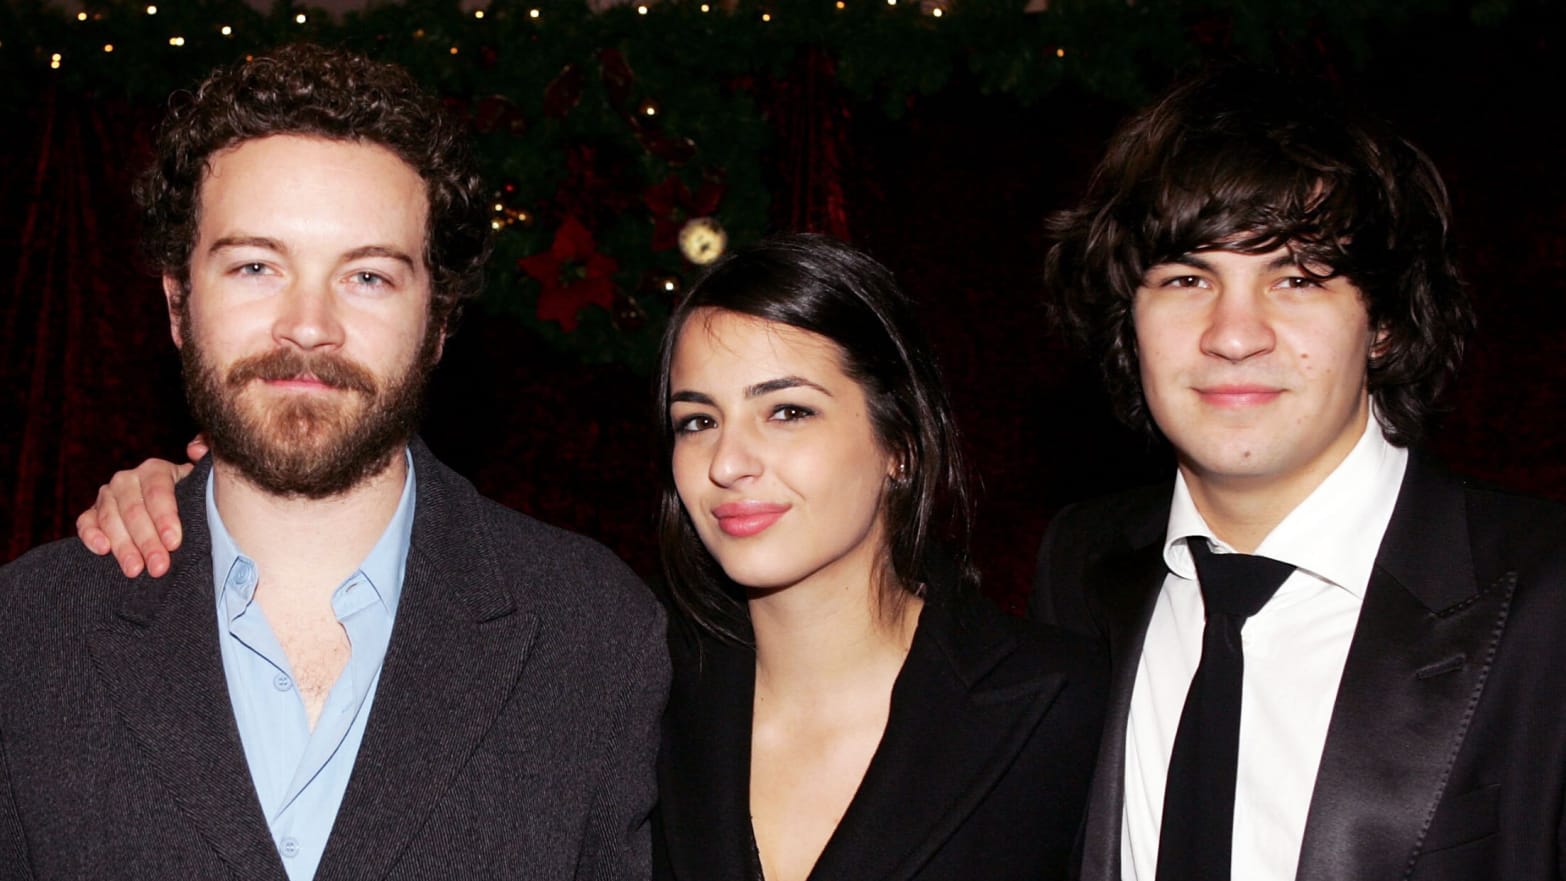 Danny Mastersons Ex-Stepdad Joe Reaiche Says His Kids Jordan and Alanna Masterson Lied to Help Actor picture photo